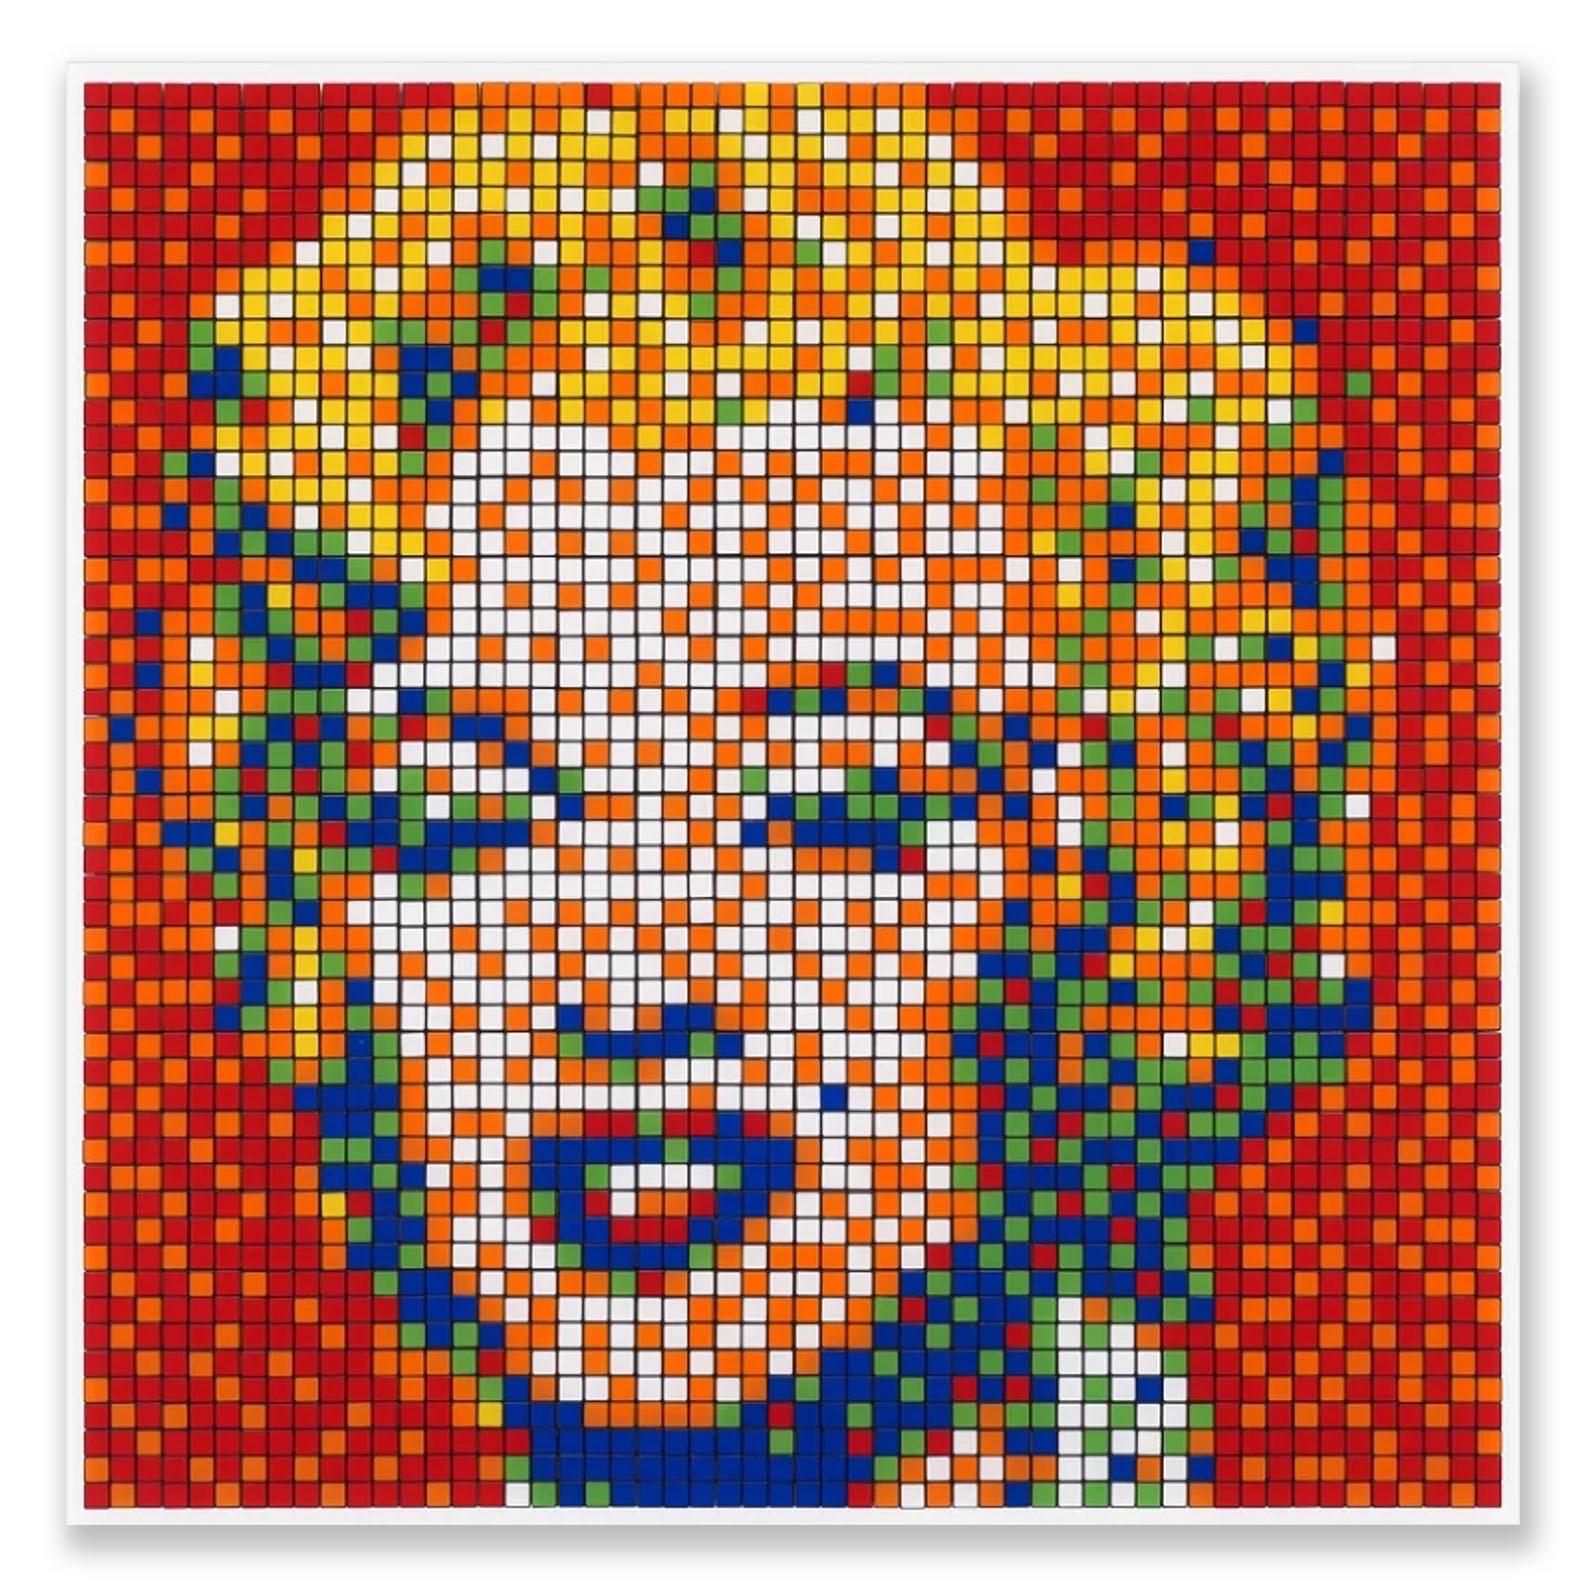 Invader, Rubik Shot Red Marilyn, 2023

Diasec-mounted Giclée on aluminium composite panel

Edition: 774

100 x 100 cm (39.4 x 39.4 in)

Description: Hand-signed and numbered by Invader on the label attached to the reverse

